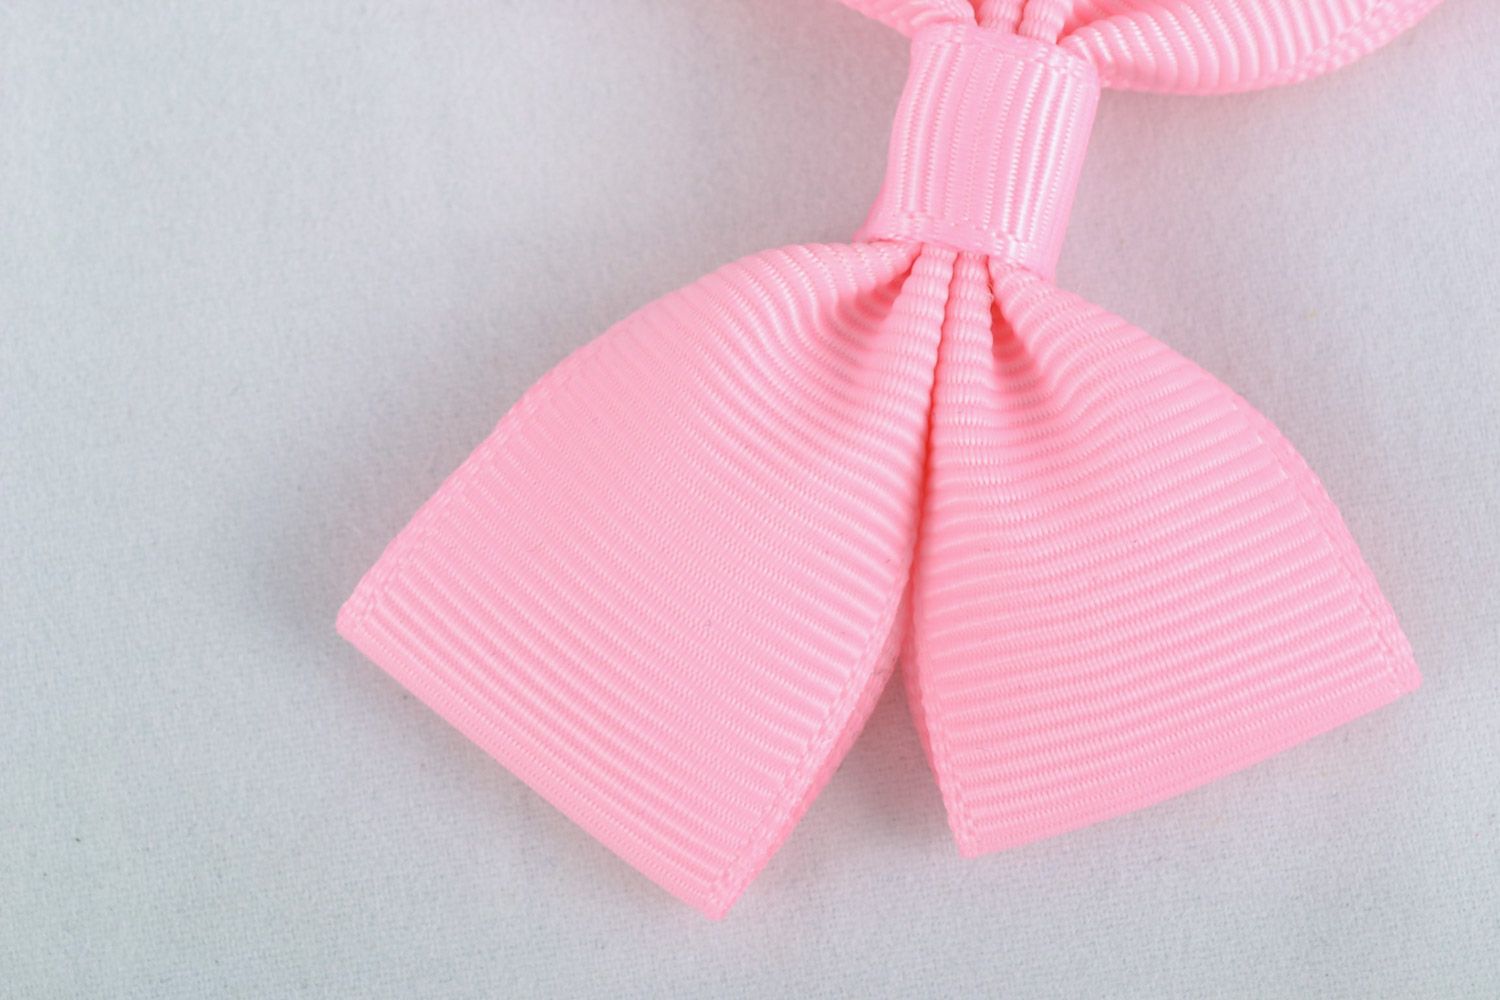 Handmade beautiful stylish pink ribbon bow for hairstyles or brooches hair accessories photo 5